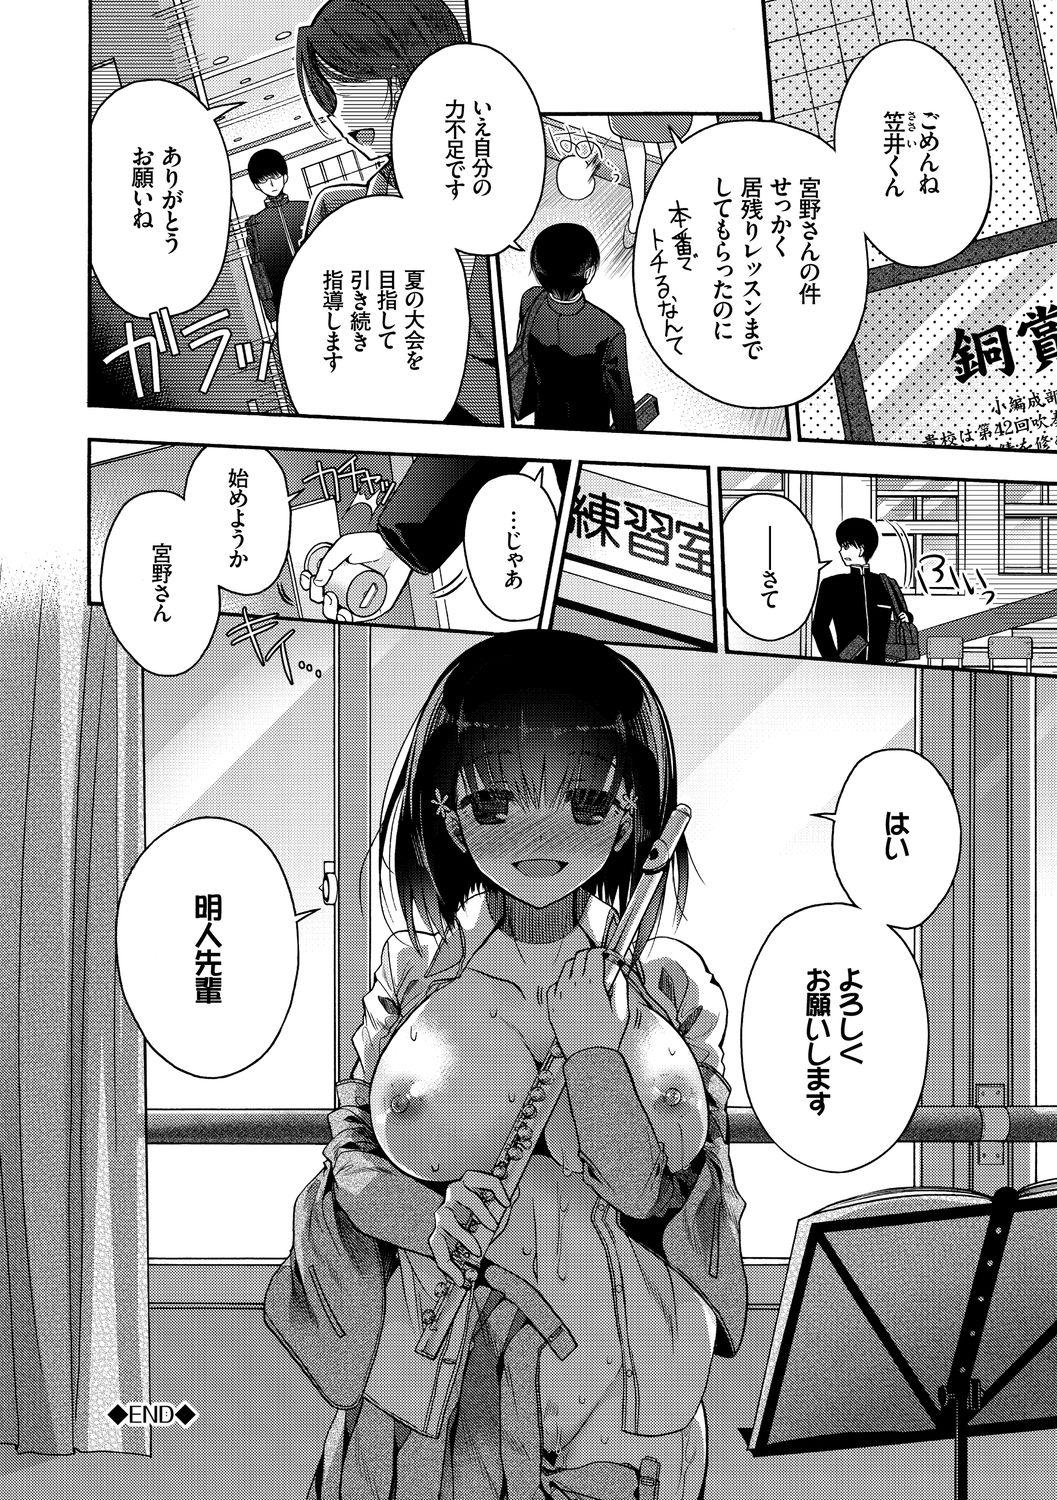 Hatsukoi Melty - Melty First Love 23